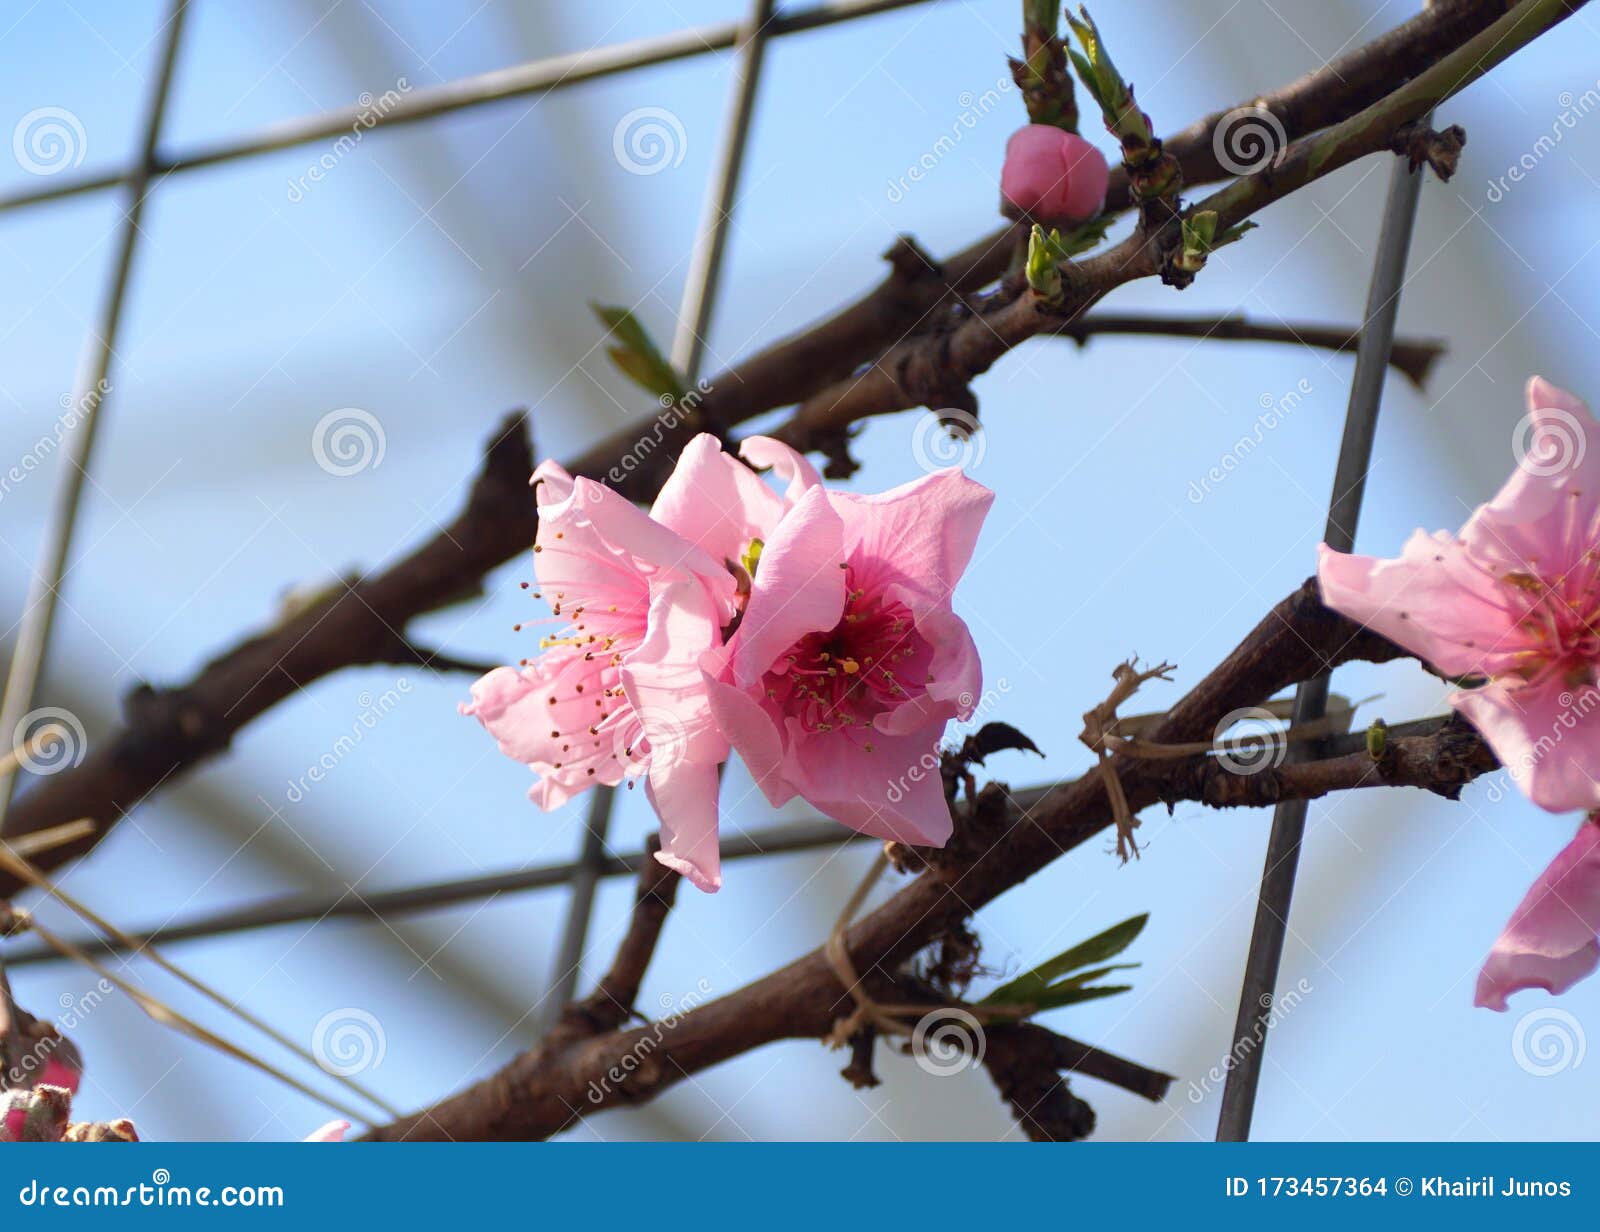 pink nectarine 'fantasia' flowers on the tree in early spring